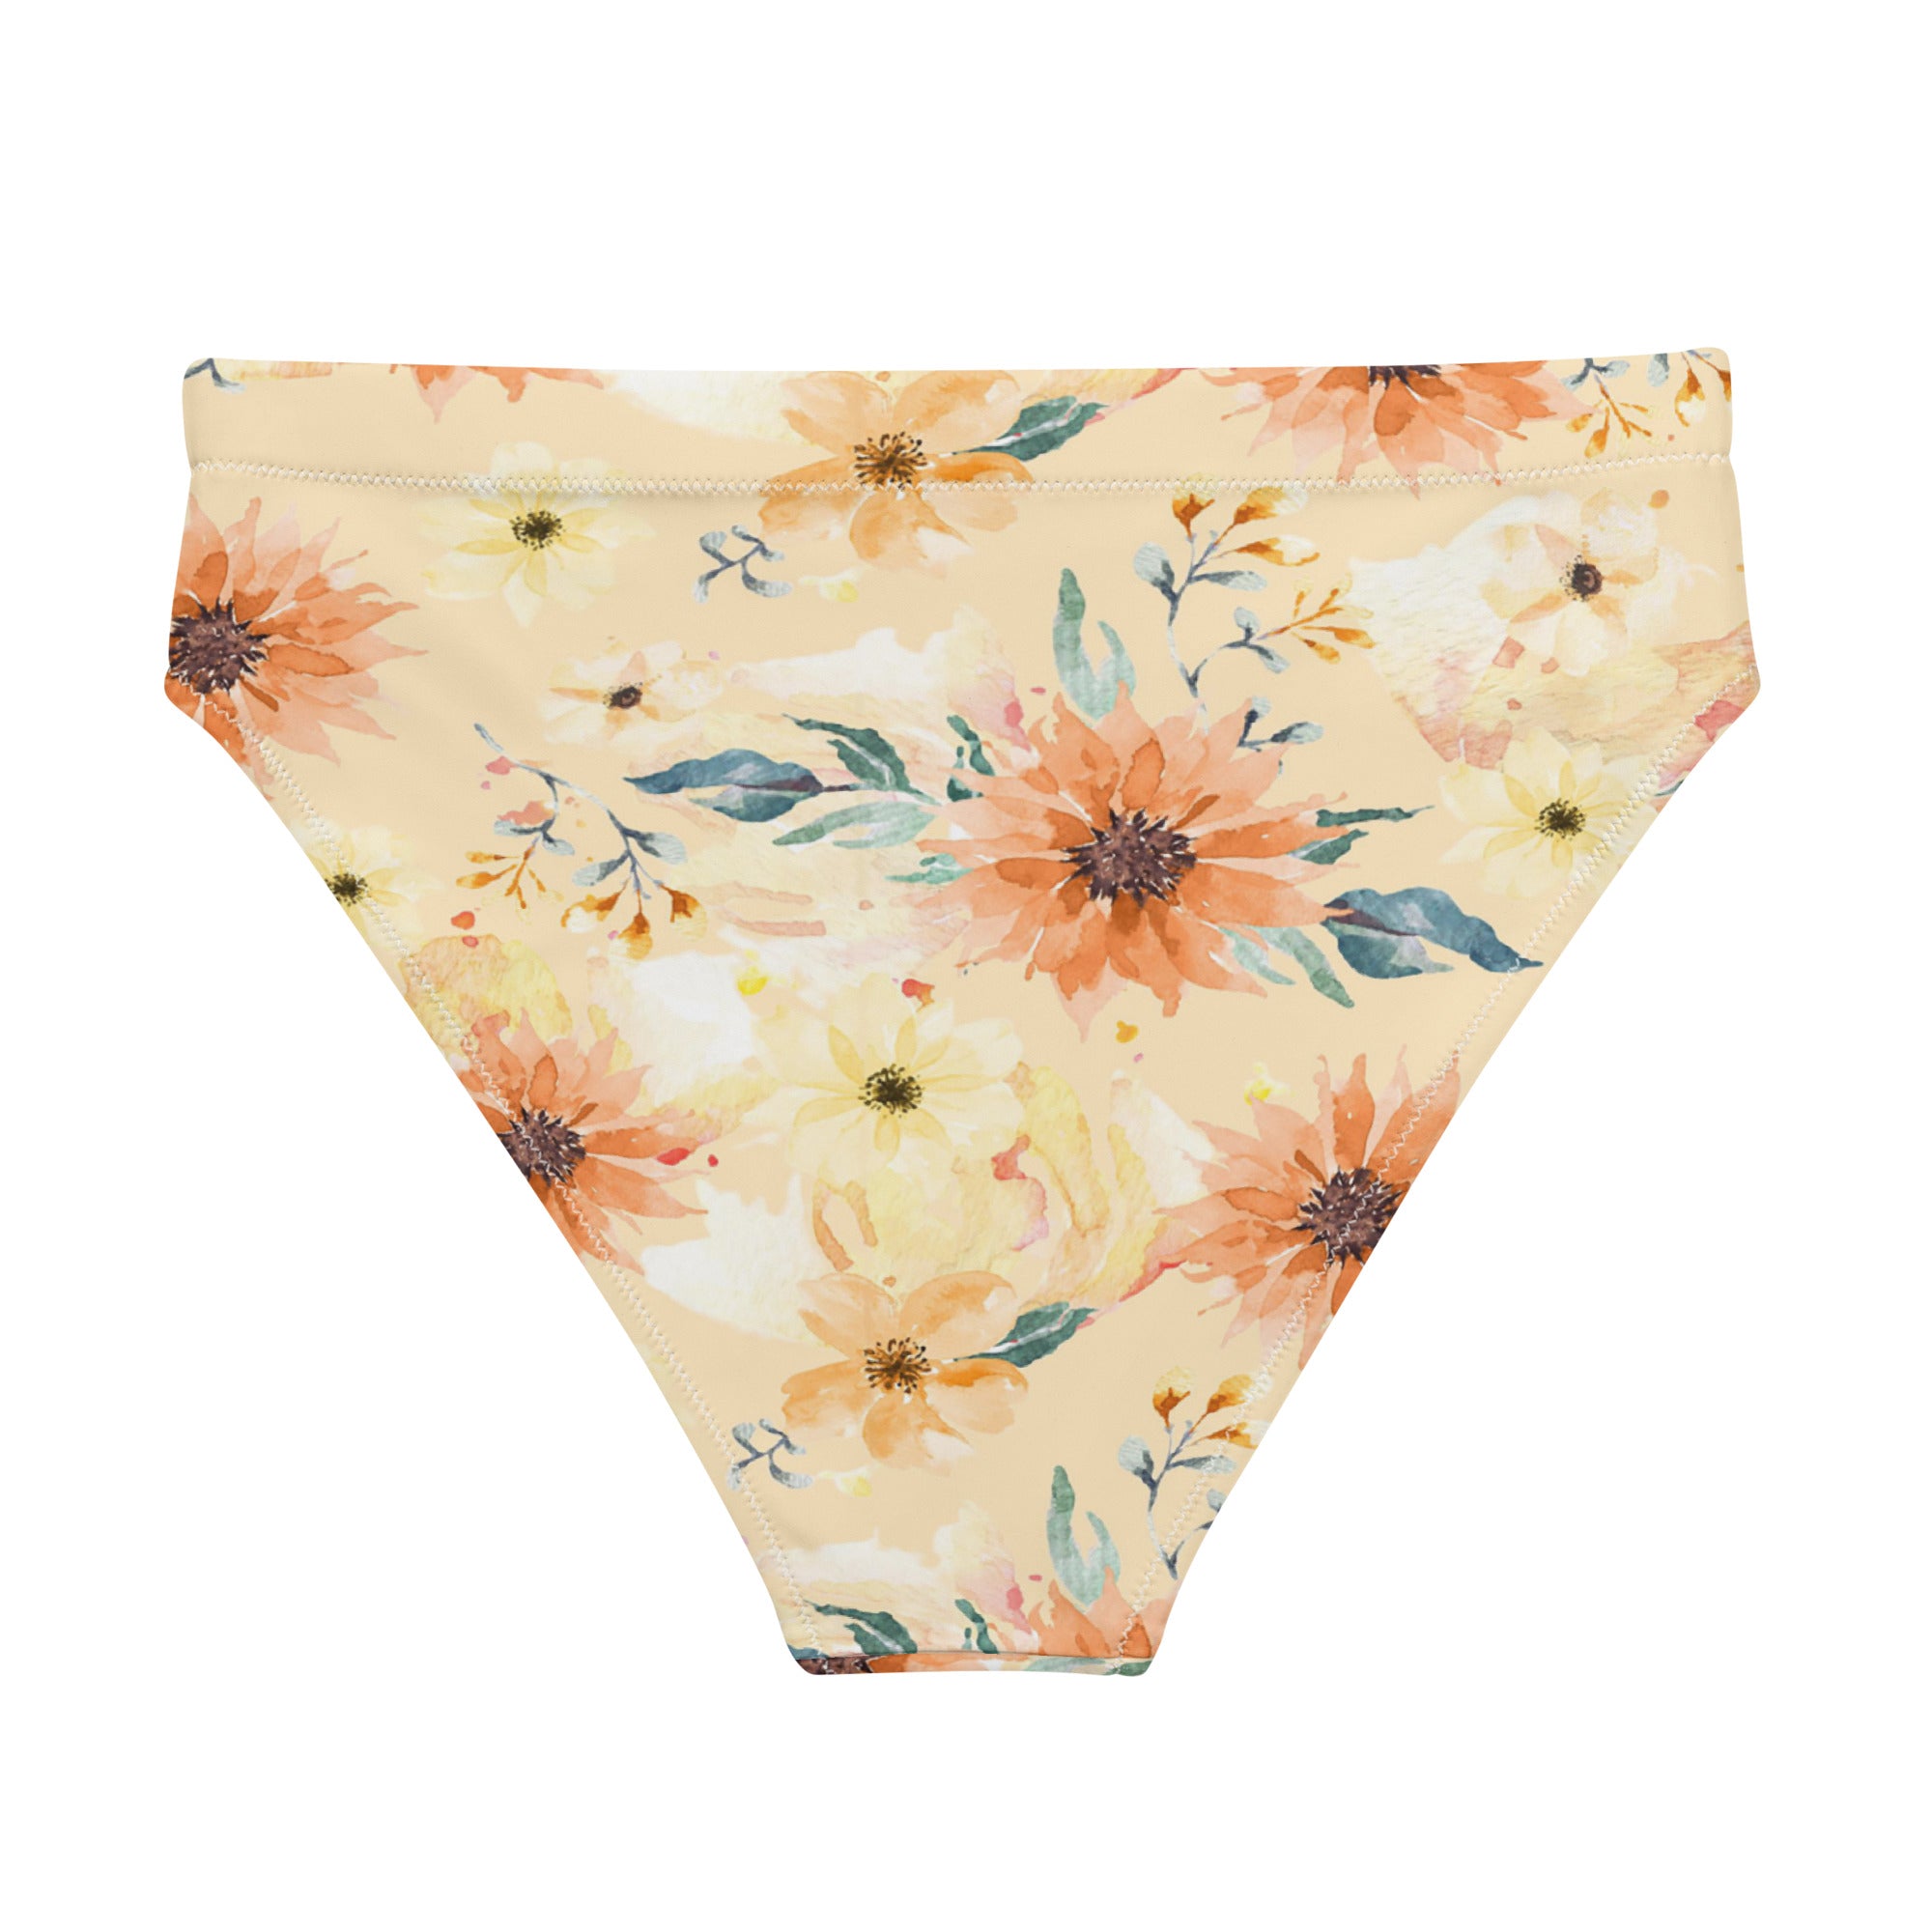 Whether you're soaking up the sun or taking a dip, our Flower Print Bikini Bottoms will make you feel confident and effortlessly chic. 